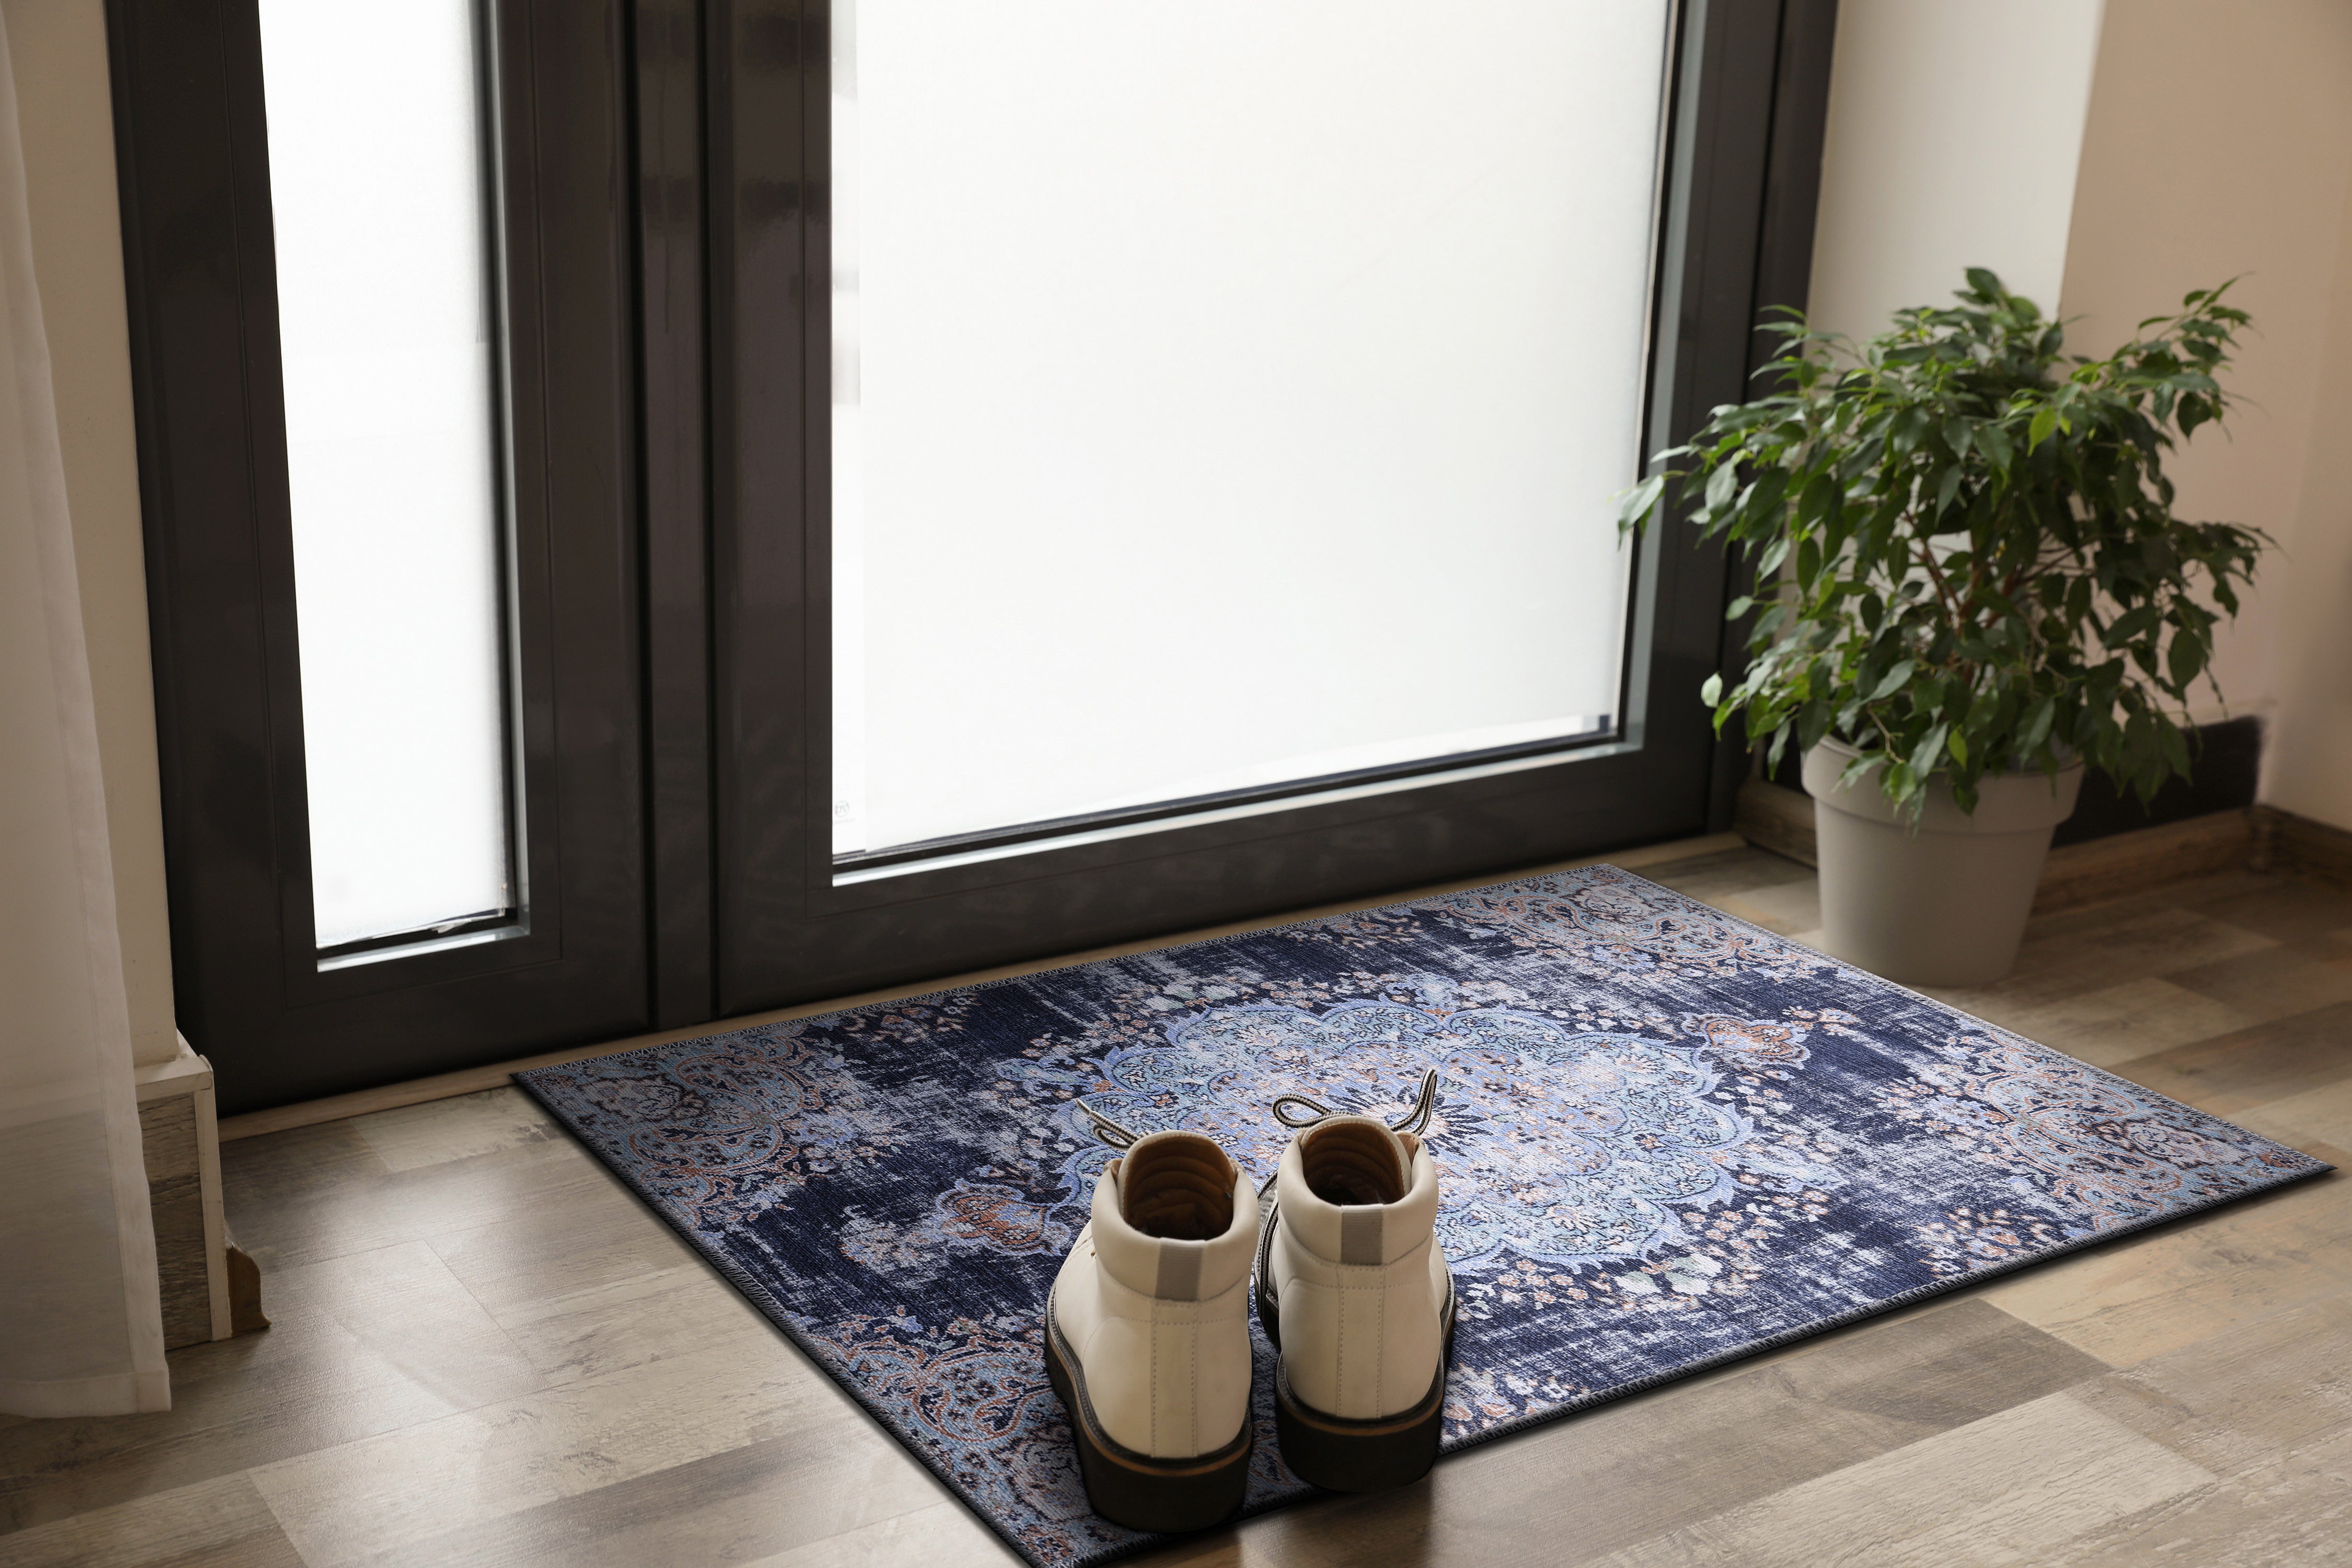 Distressed Area Rugs Navy Blue